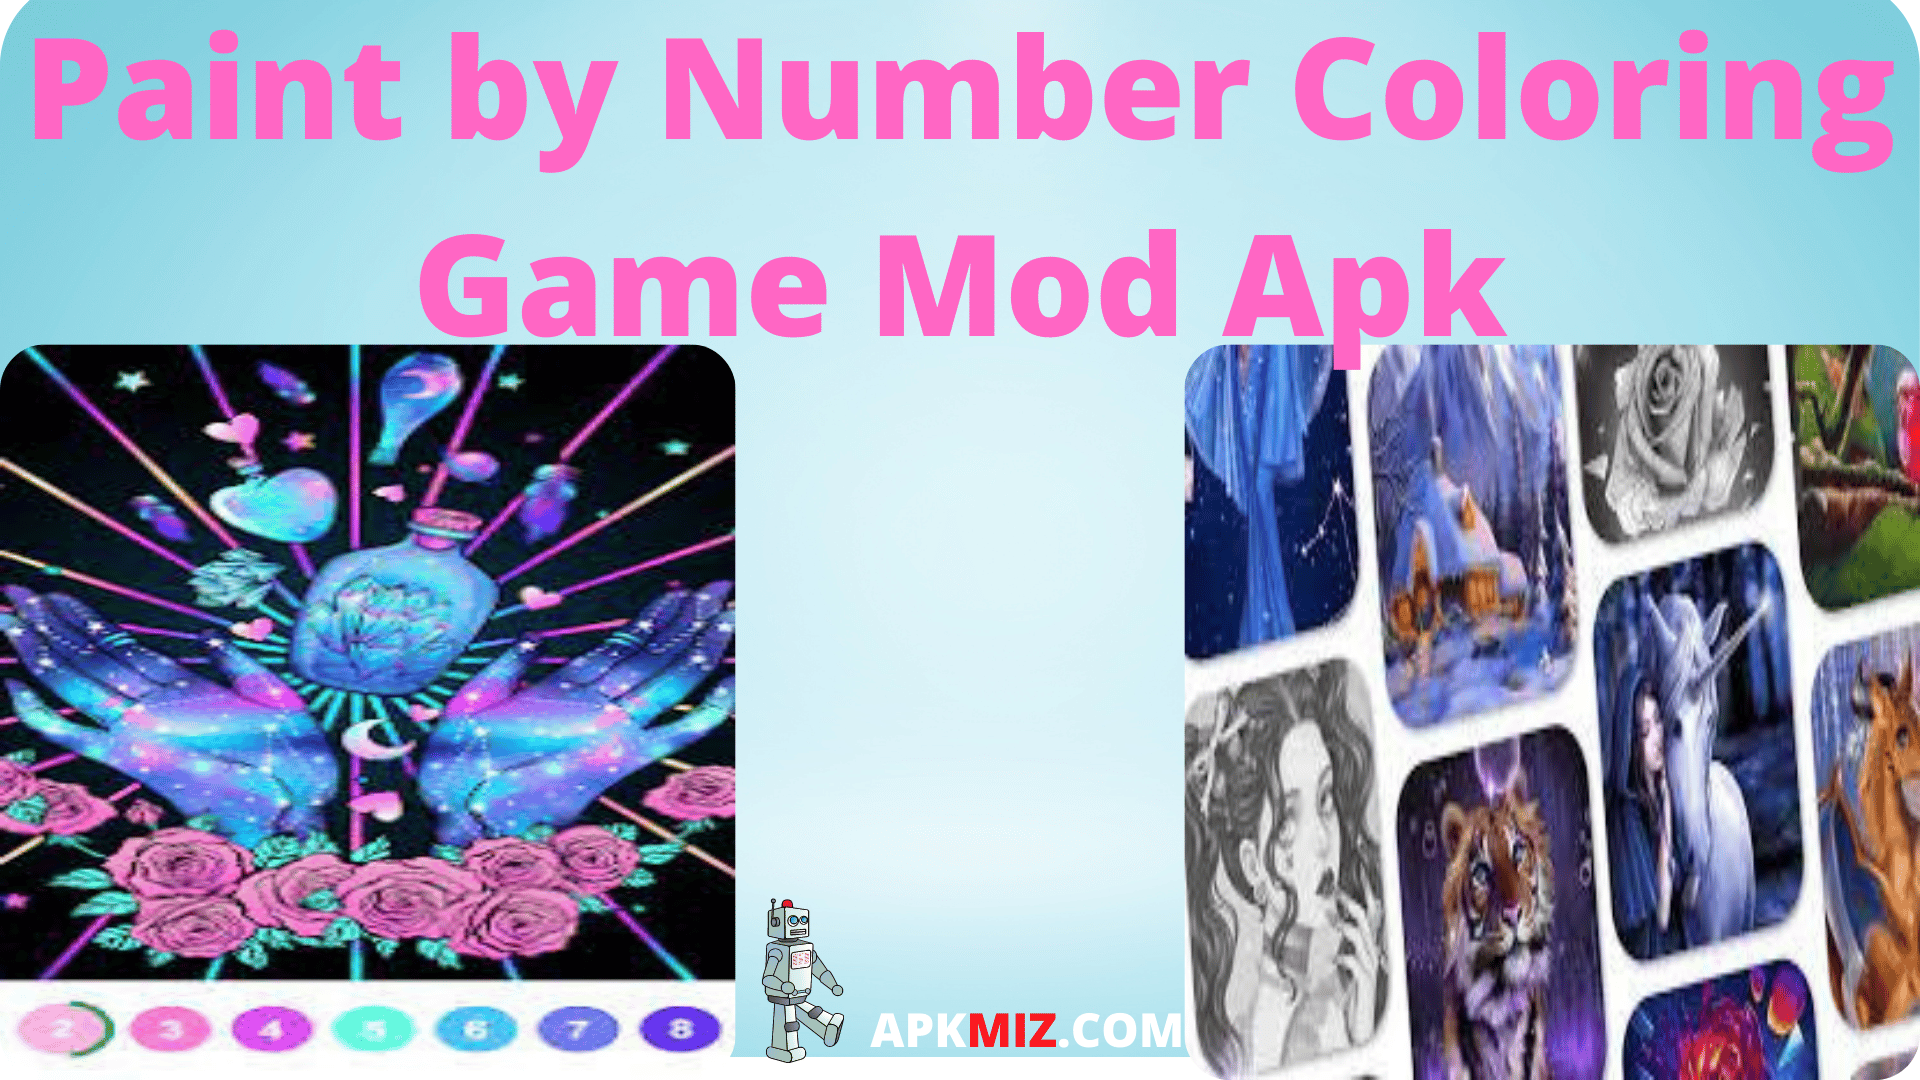 Paint by Number Coloring Game Mod Apk